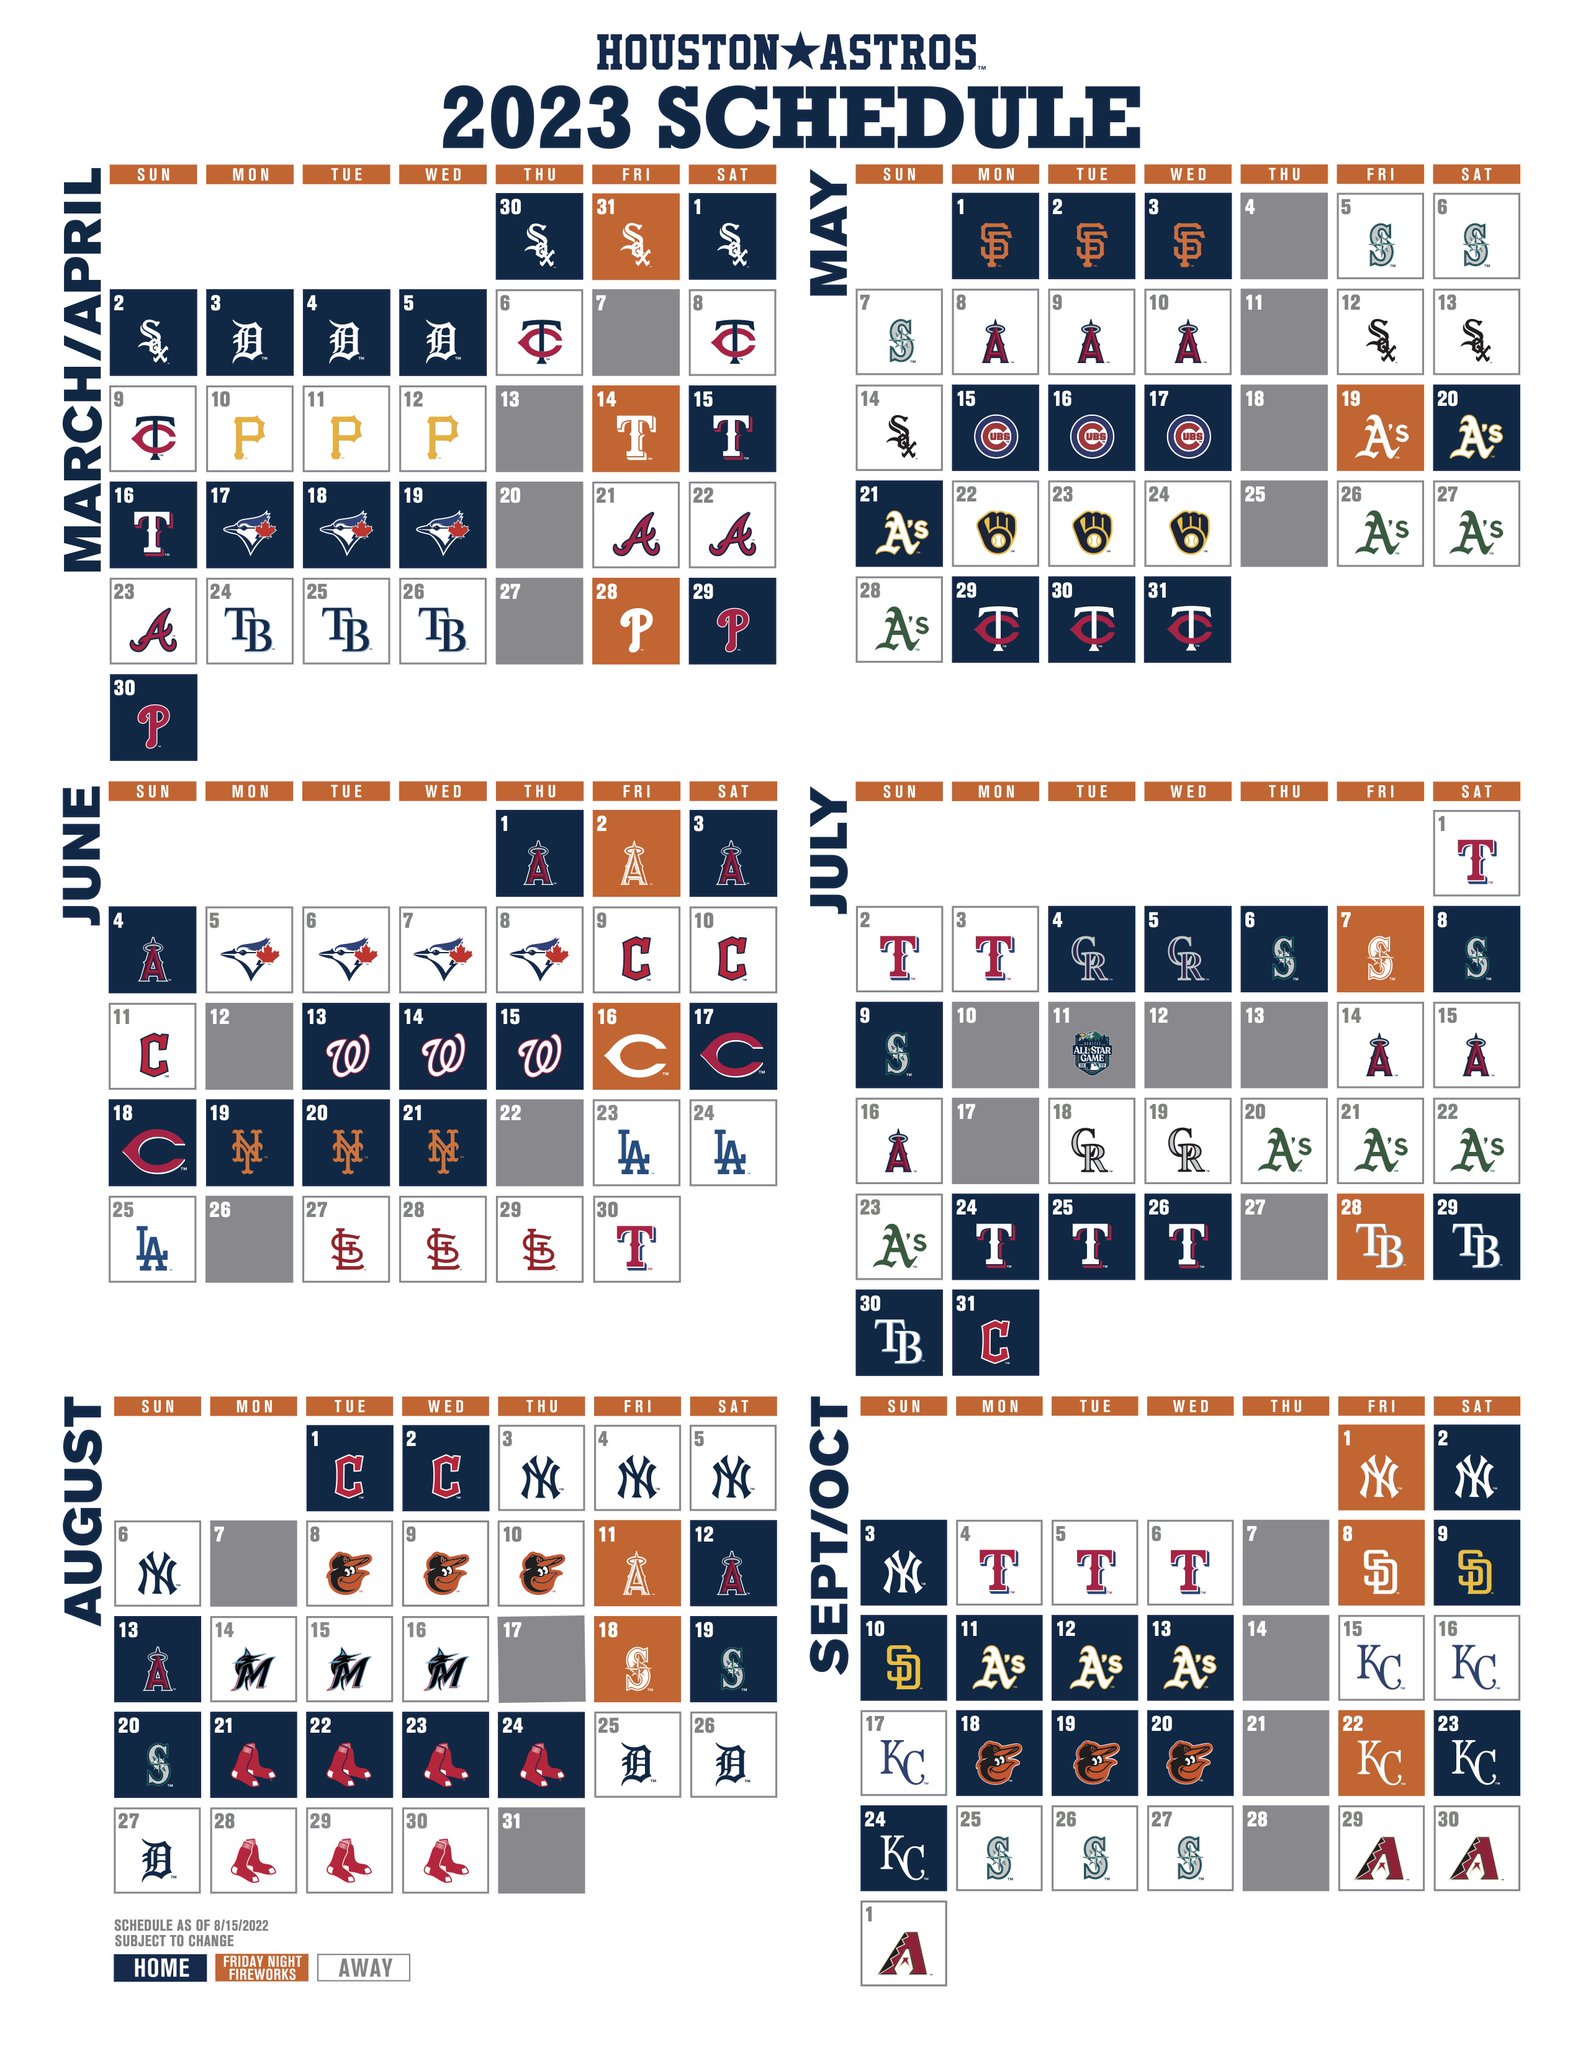 Houston Astros on Twitter "Get your season tickets by going to https